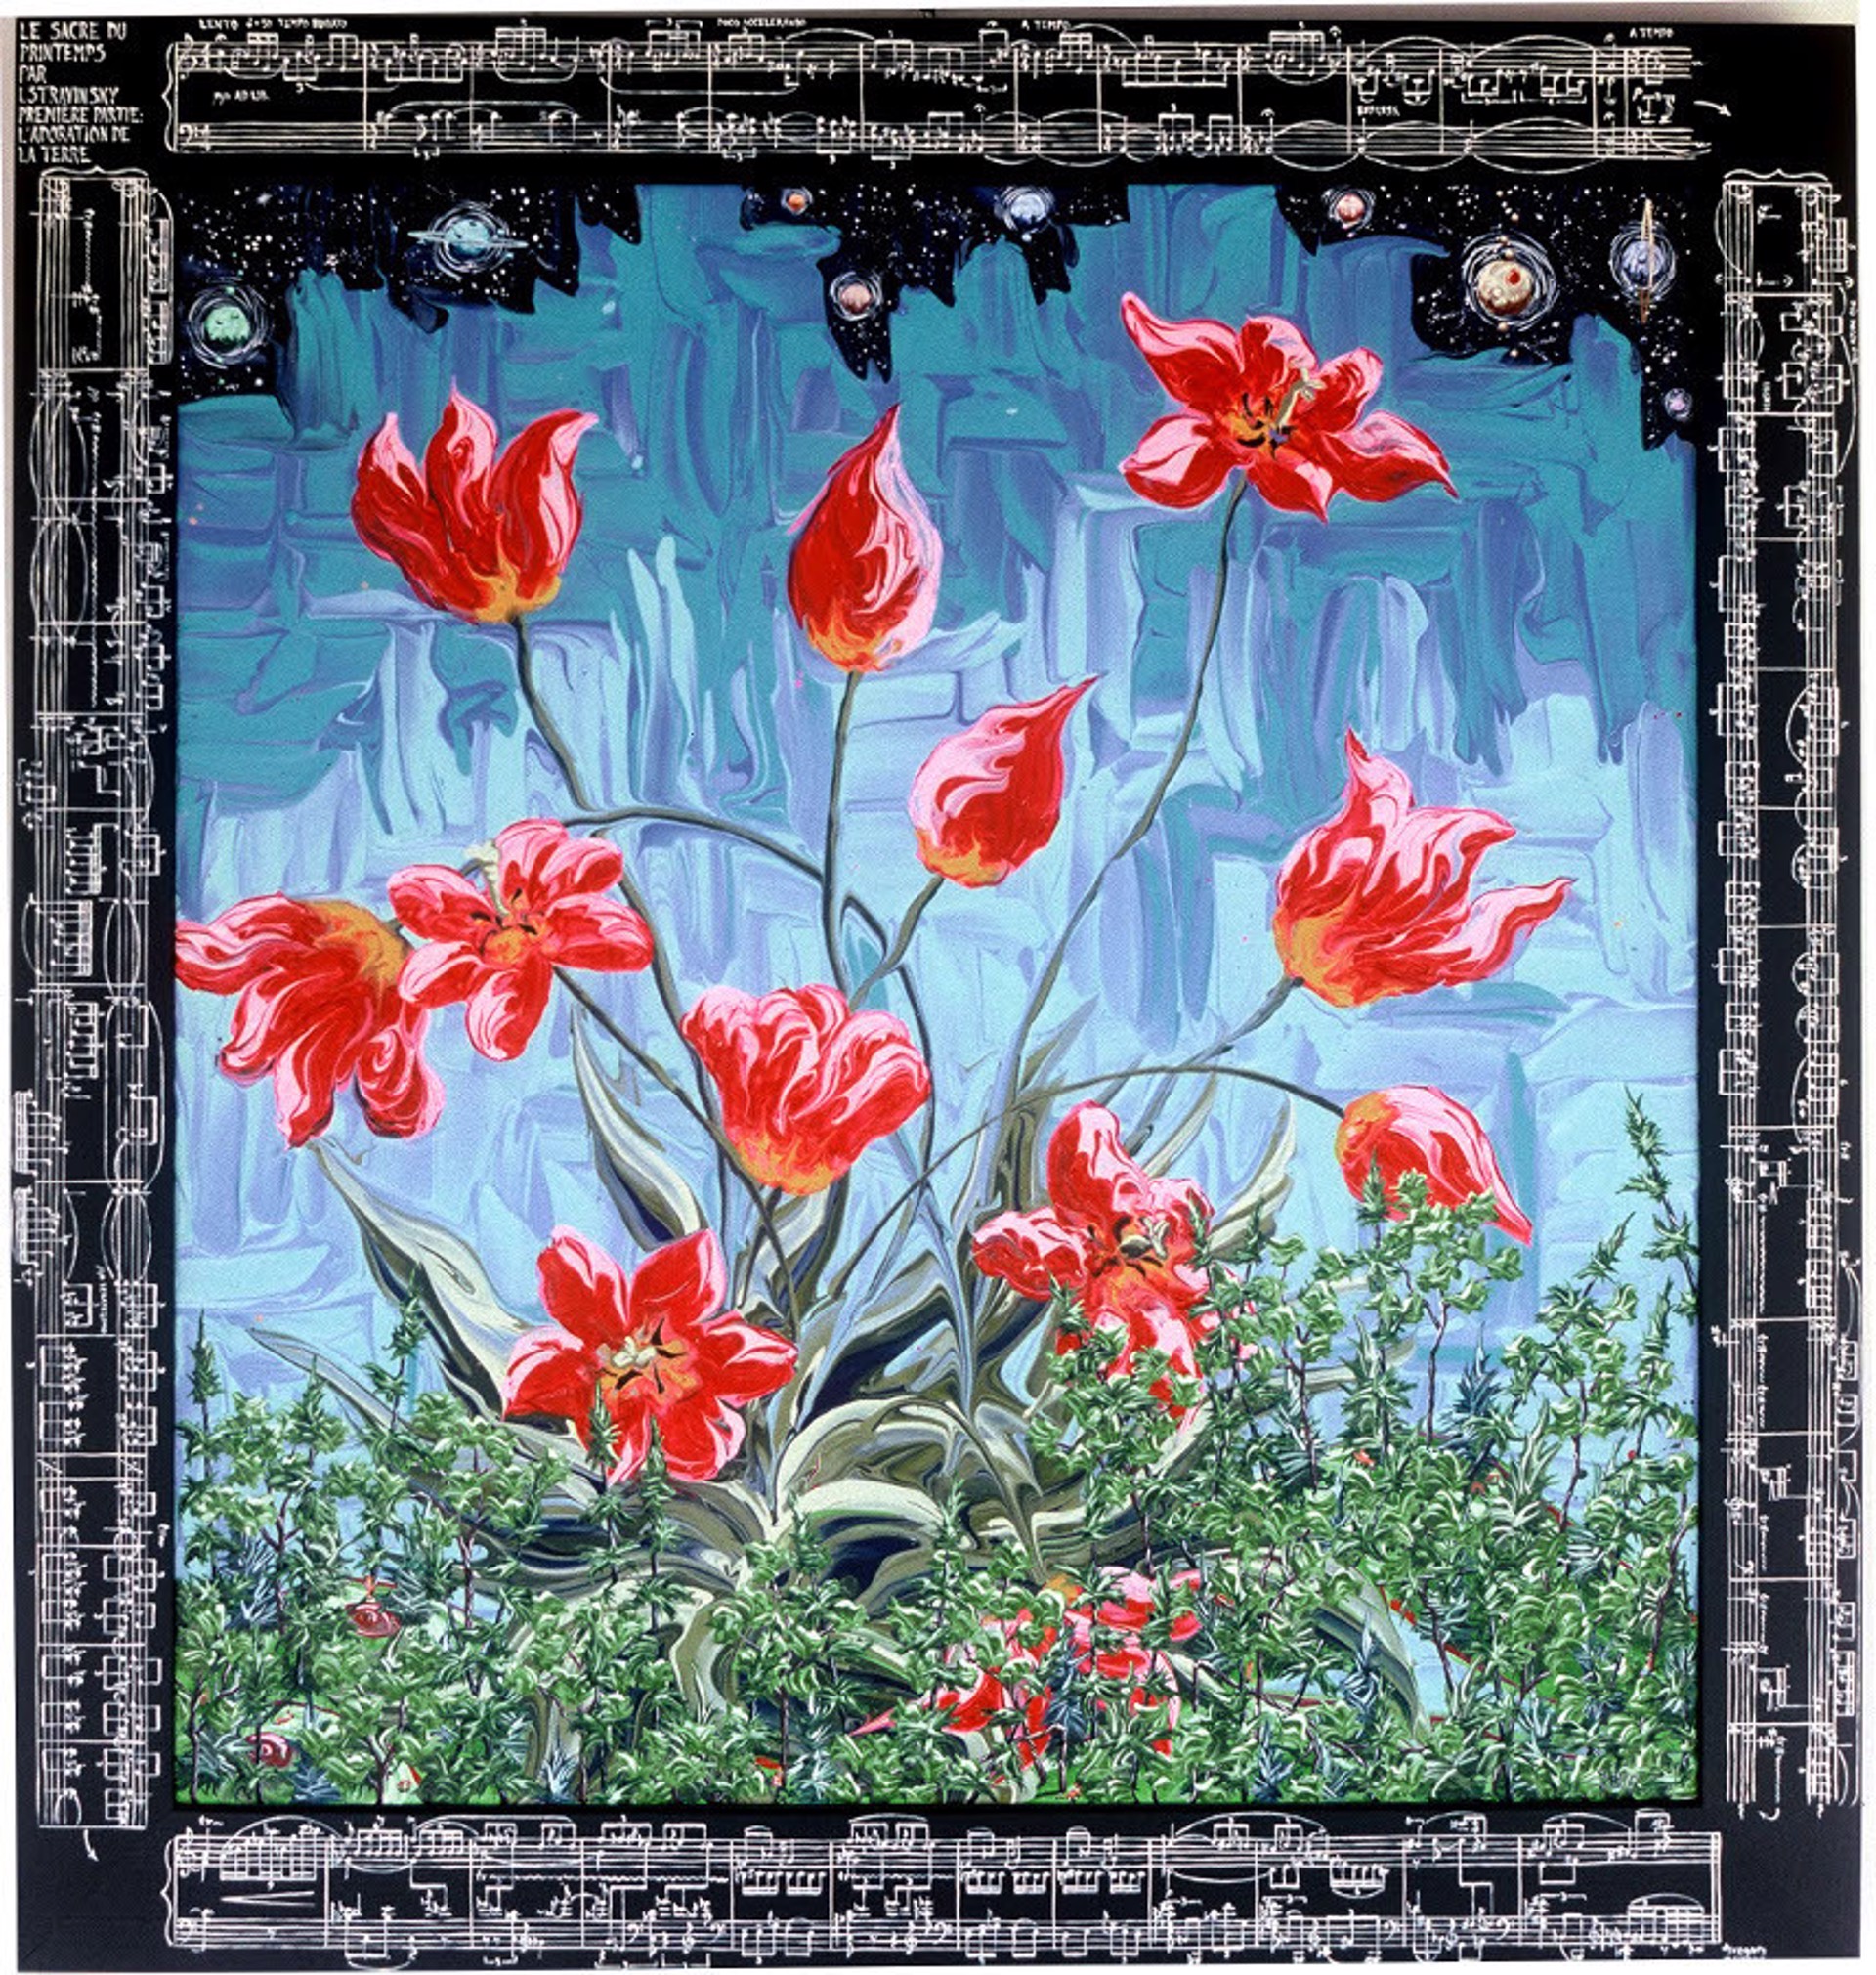 Rite of Spring with Tulips by Gregory Horndeski